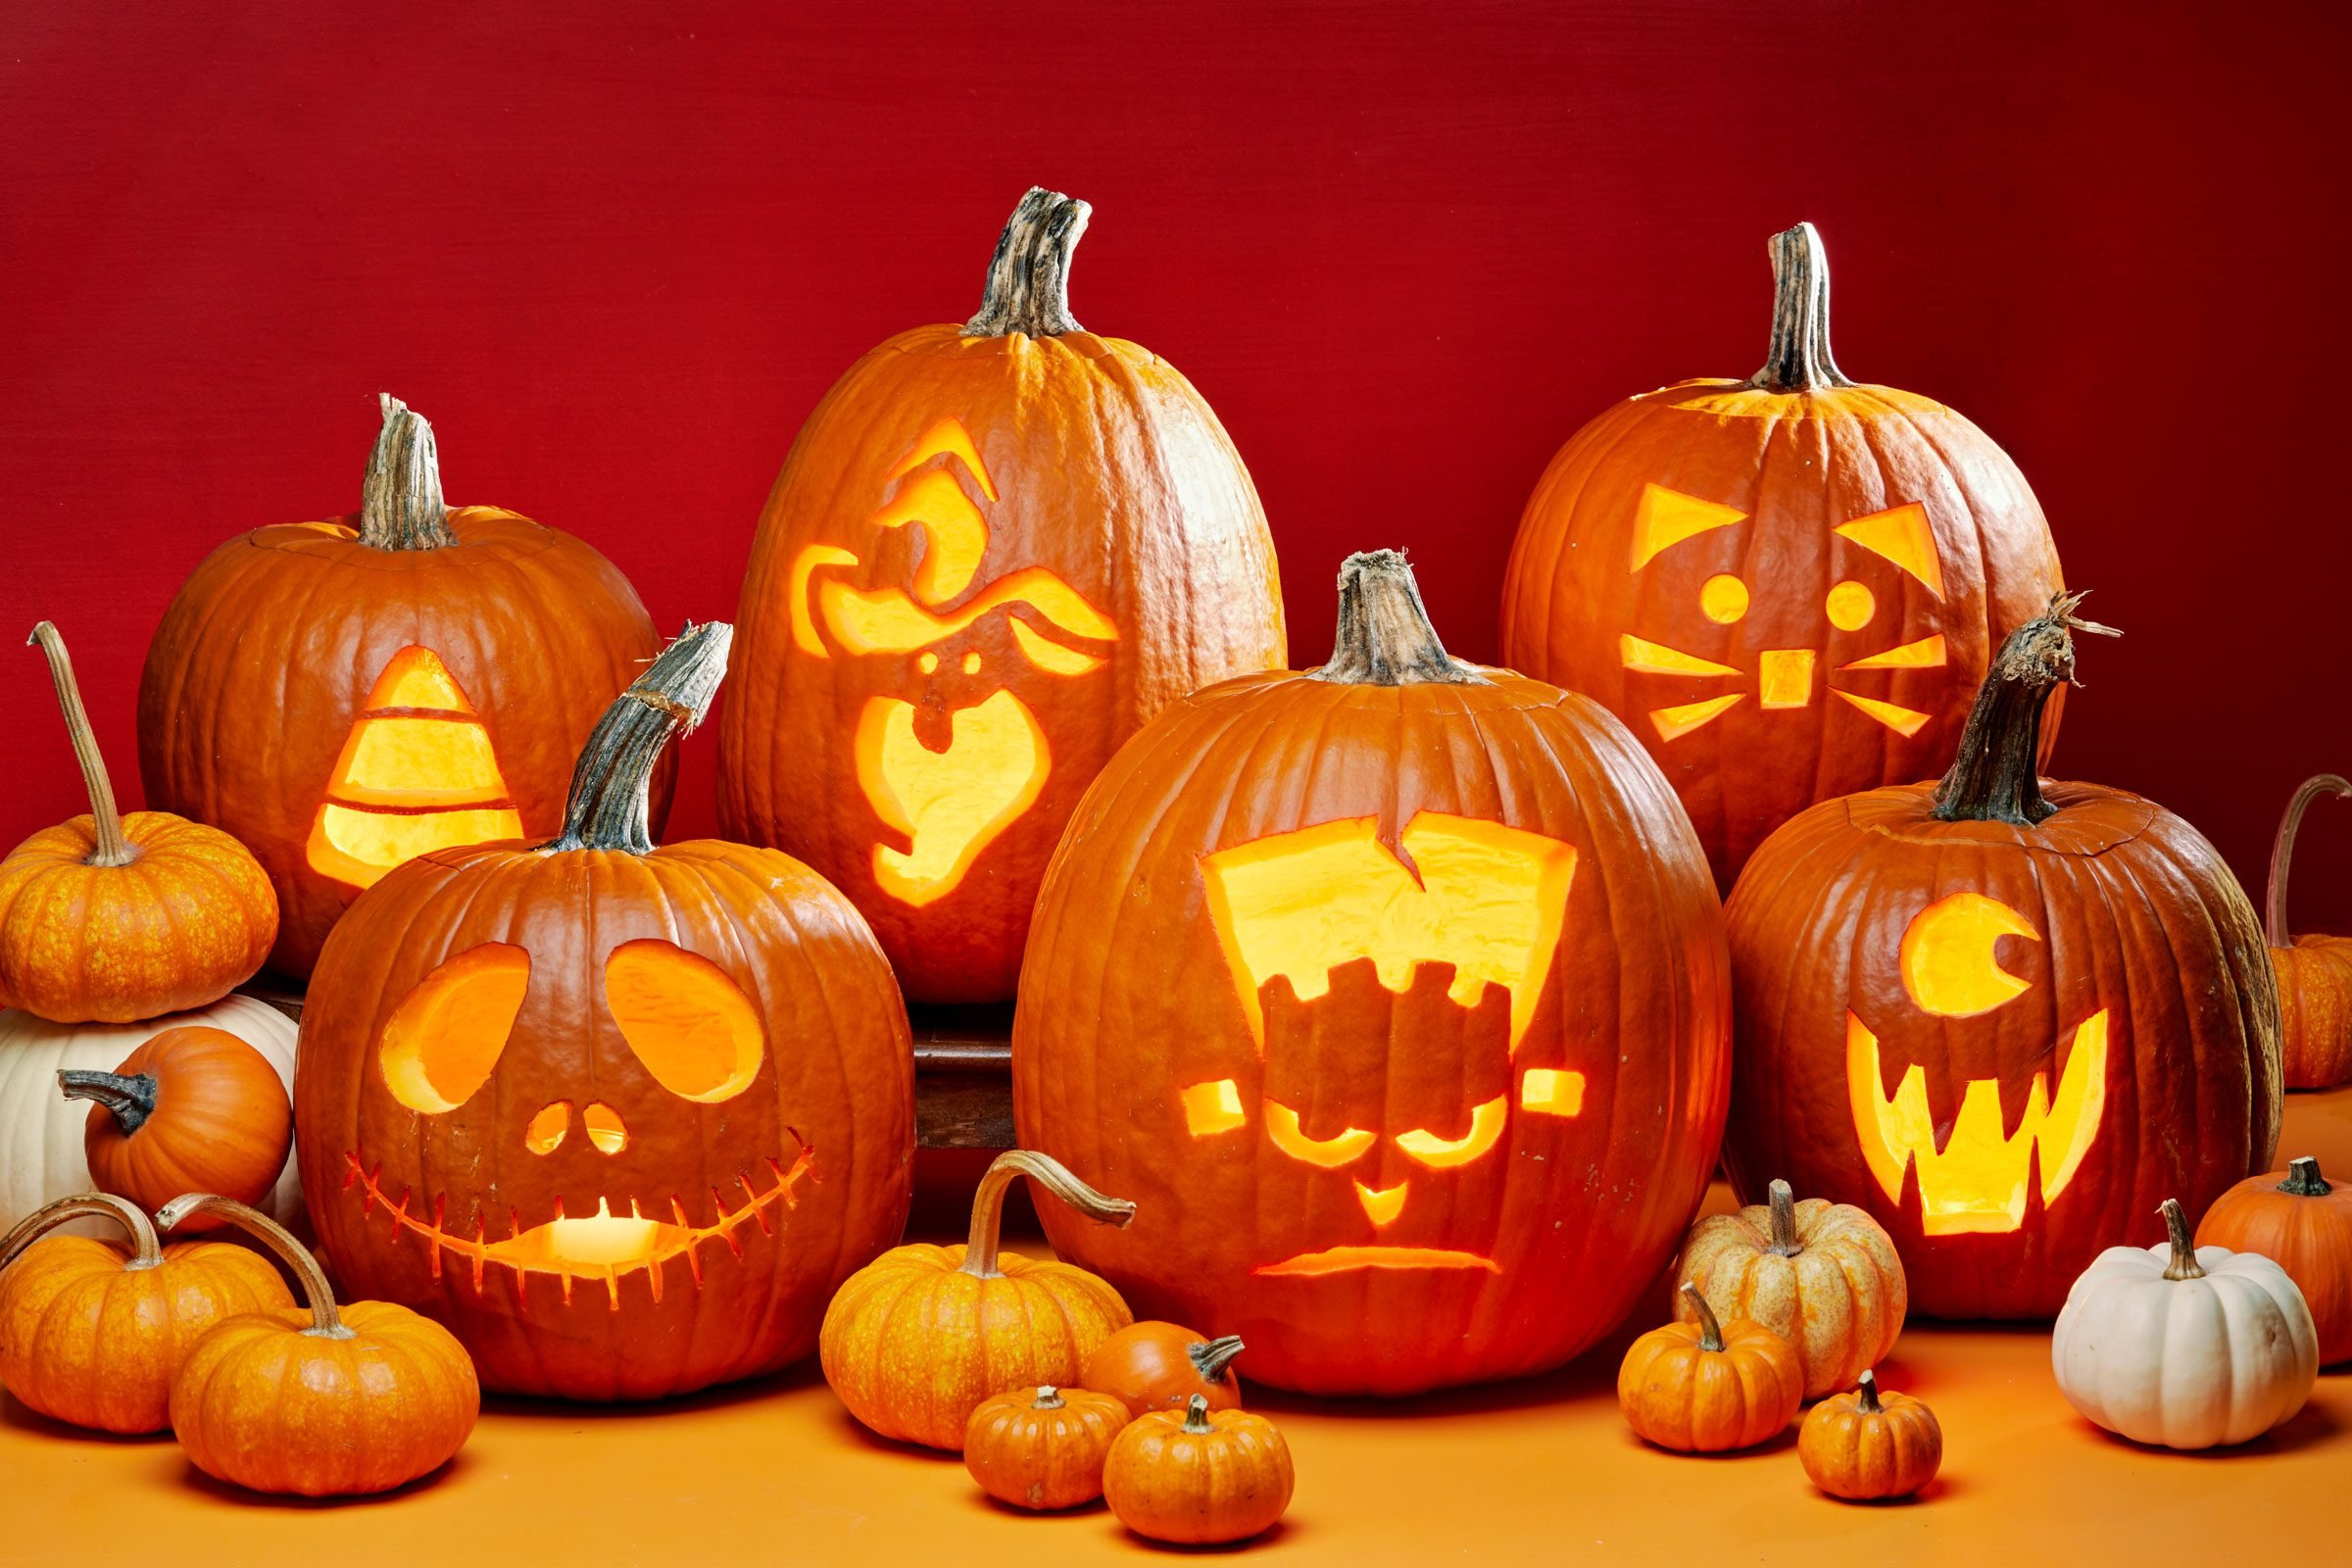 scary face pumpkin carving patterns